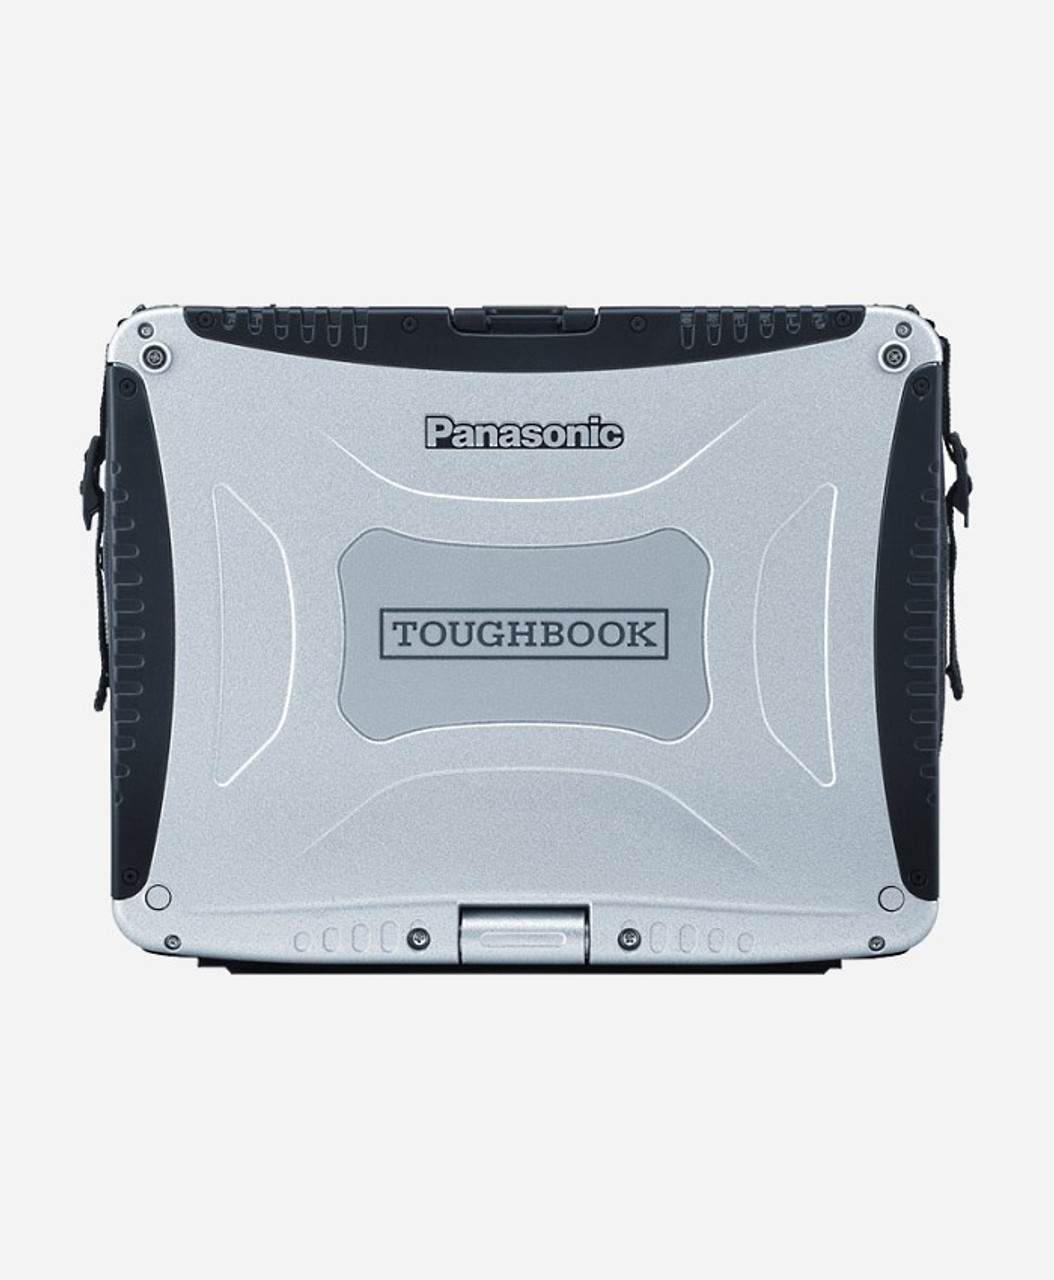 Toughbook 10.1-inch (Anti-Glare 1024 x 768) All Configurations and Options.  - Panasonic CF-19